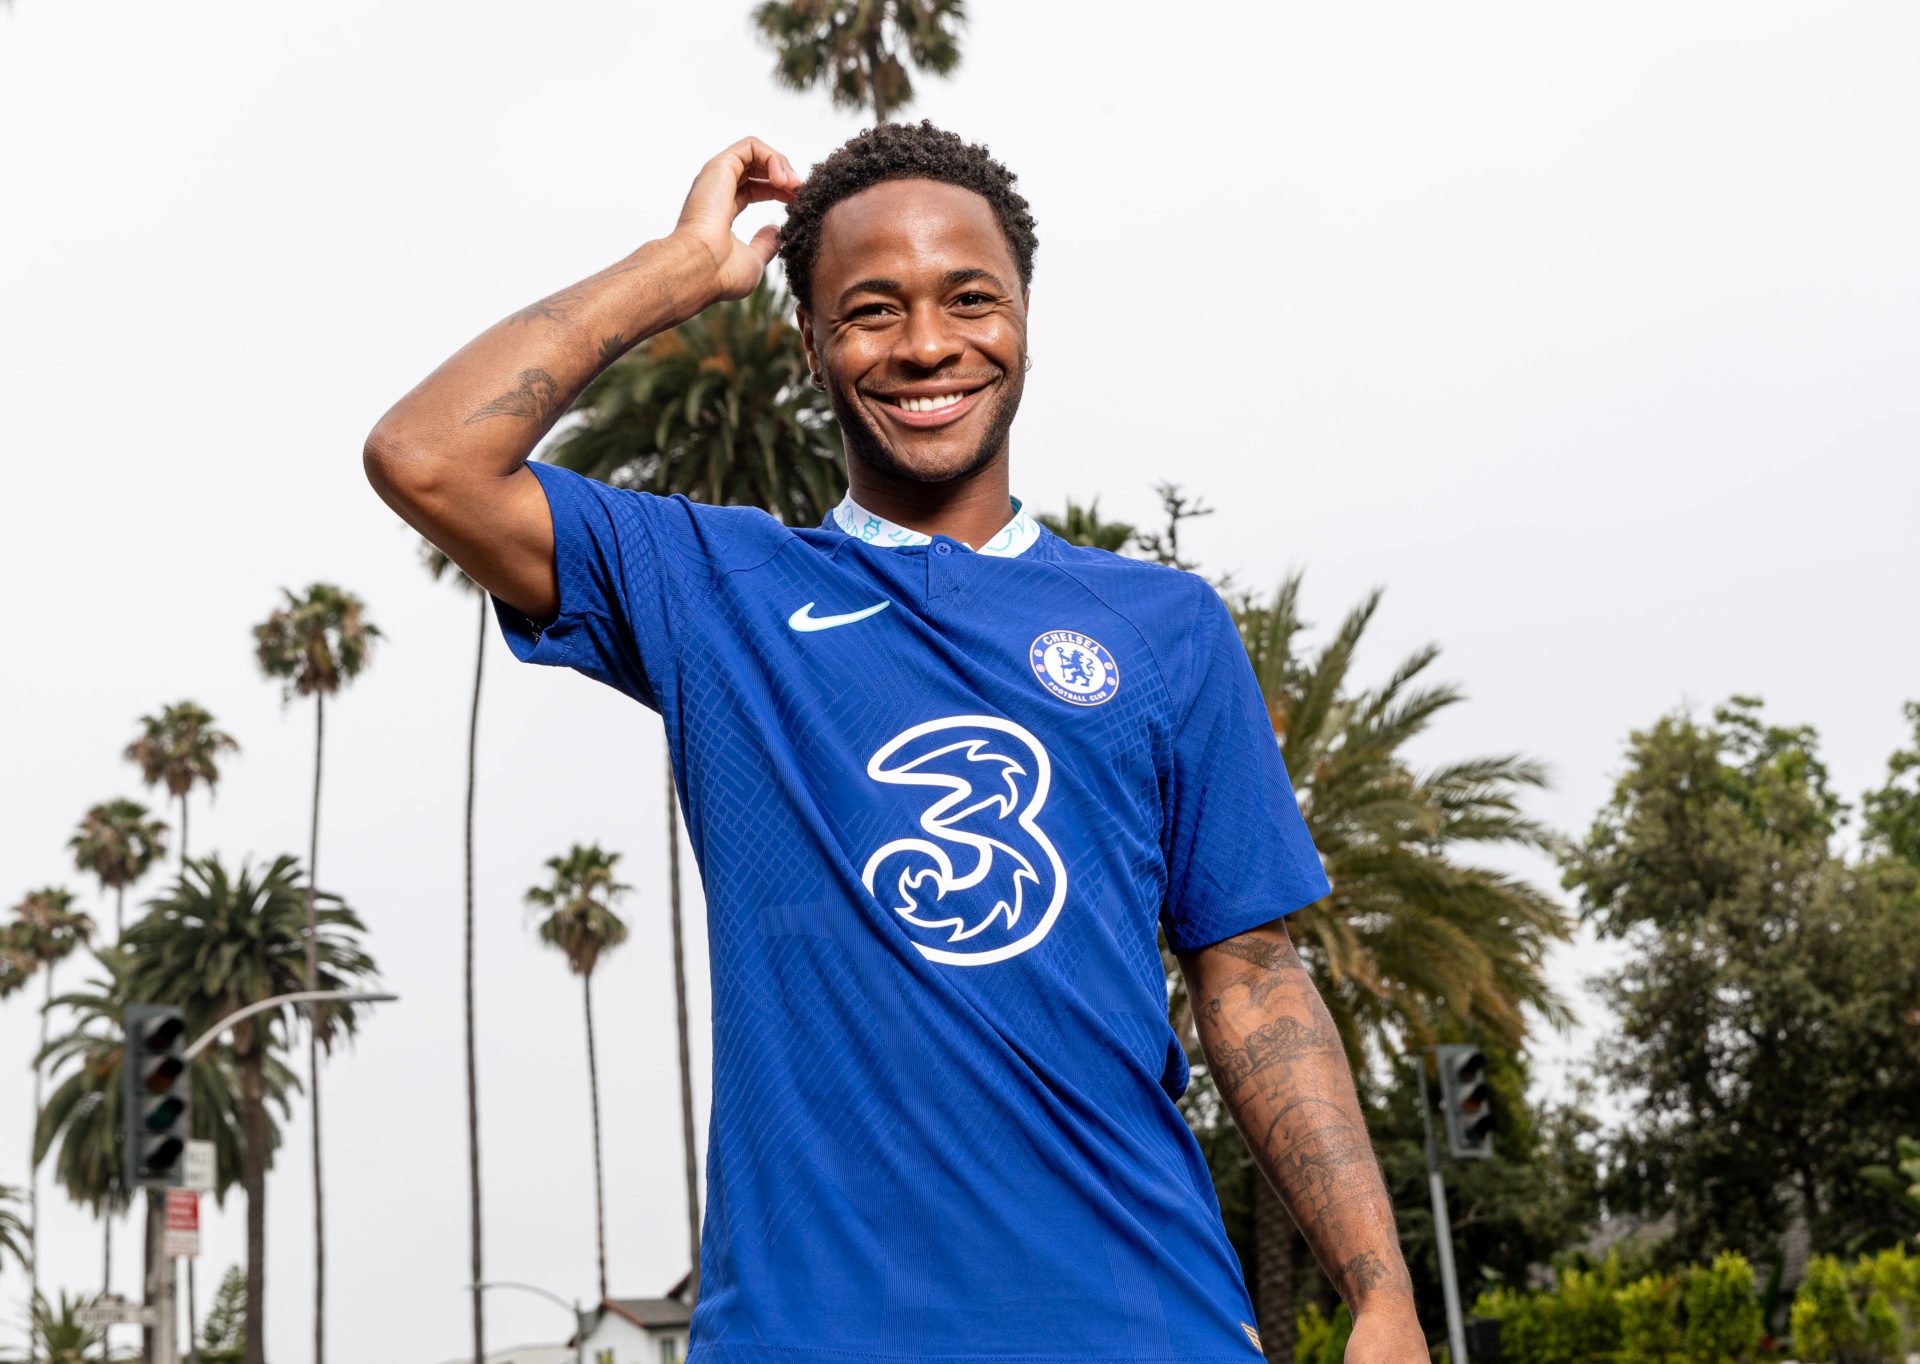 Rating every Chelsea summer signing (2022/23)